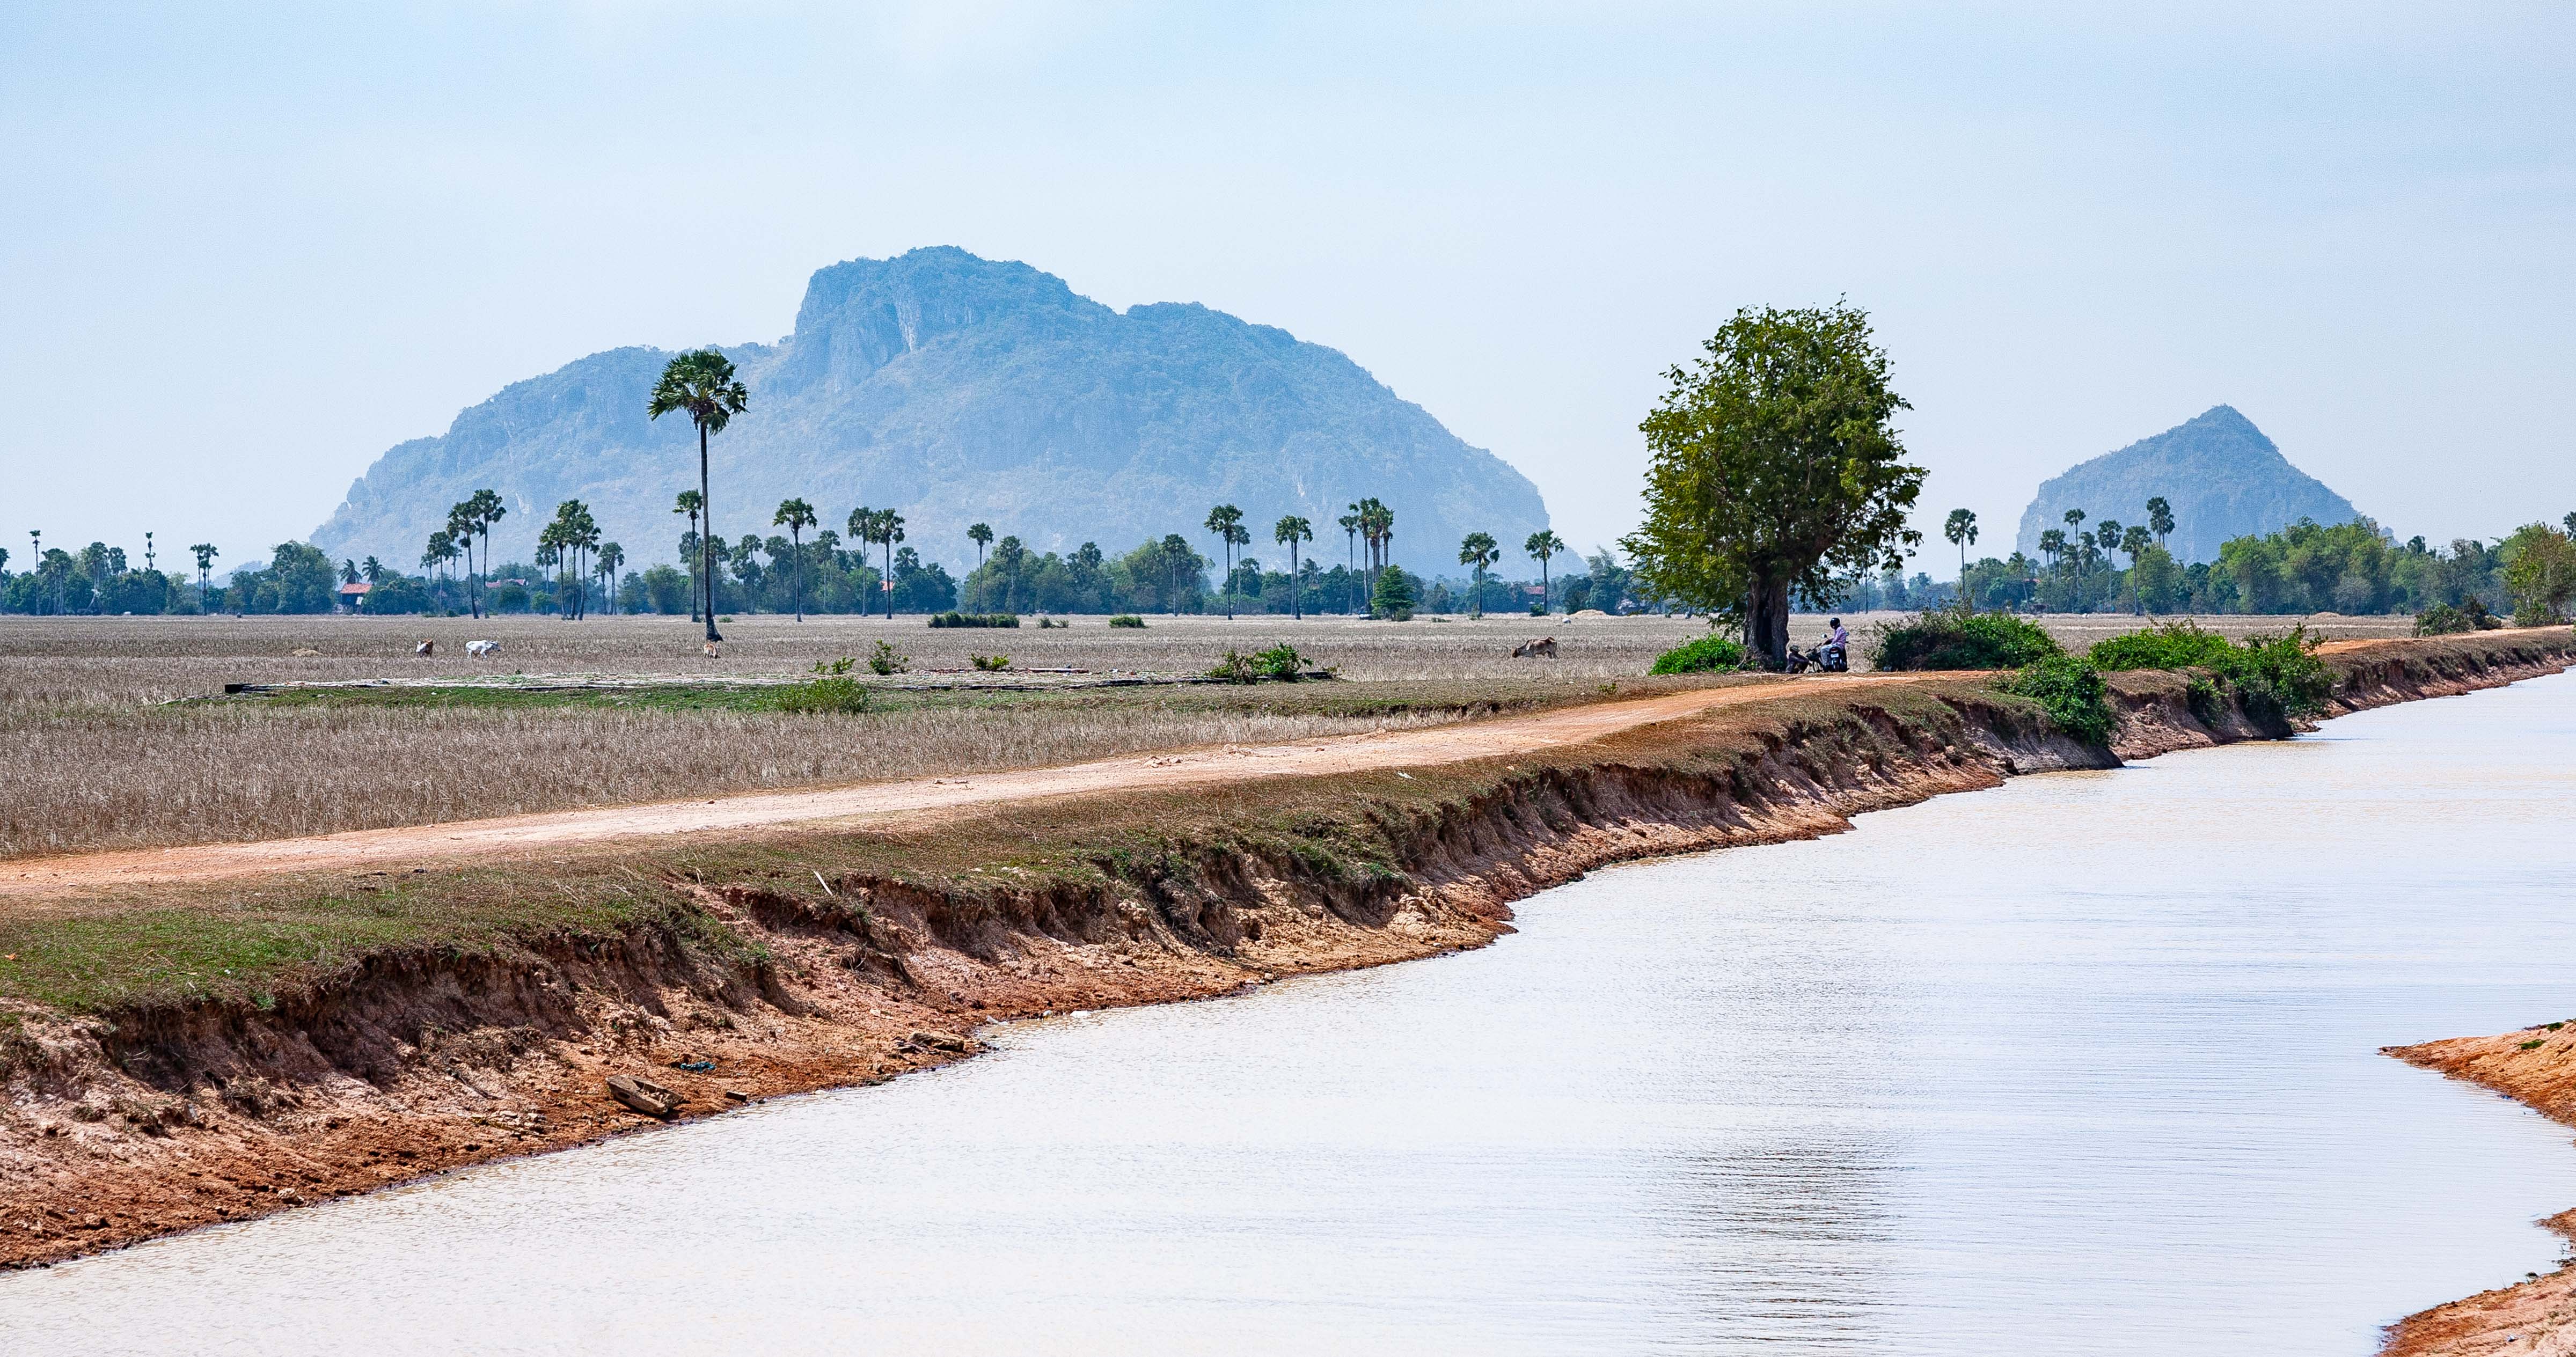 Cambodia, Kampot Prov, Landscape And Canal, 2010, IMG 4849